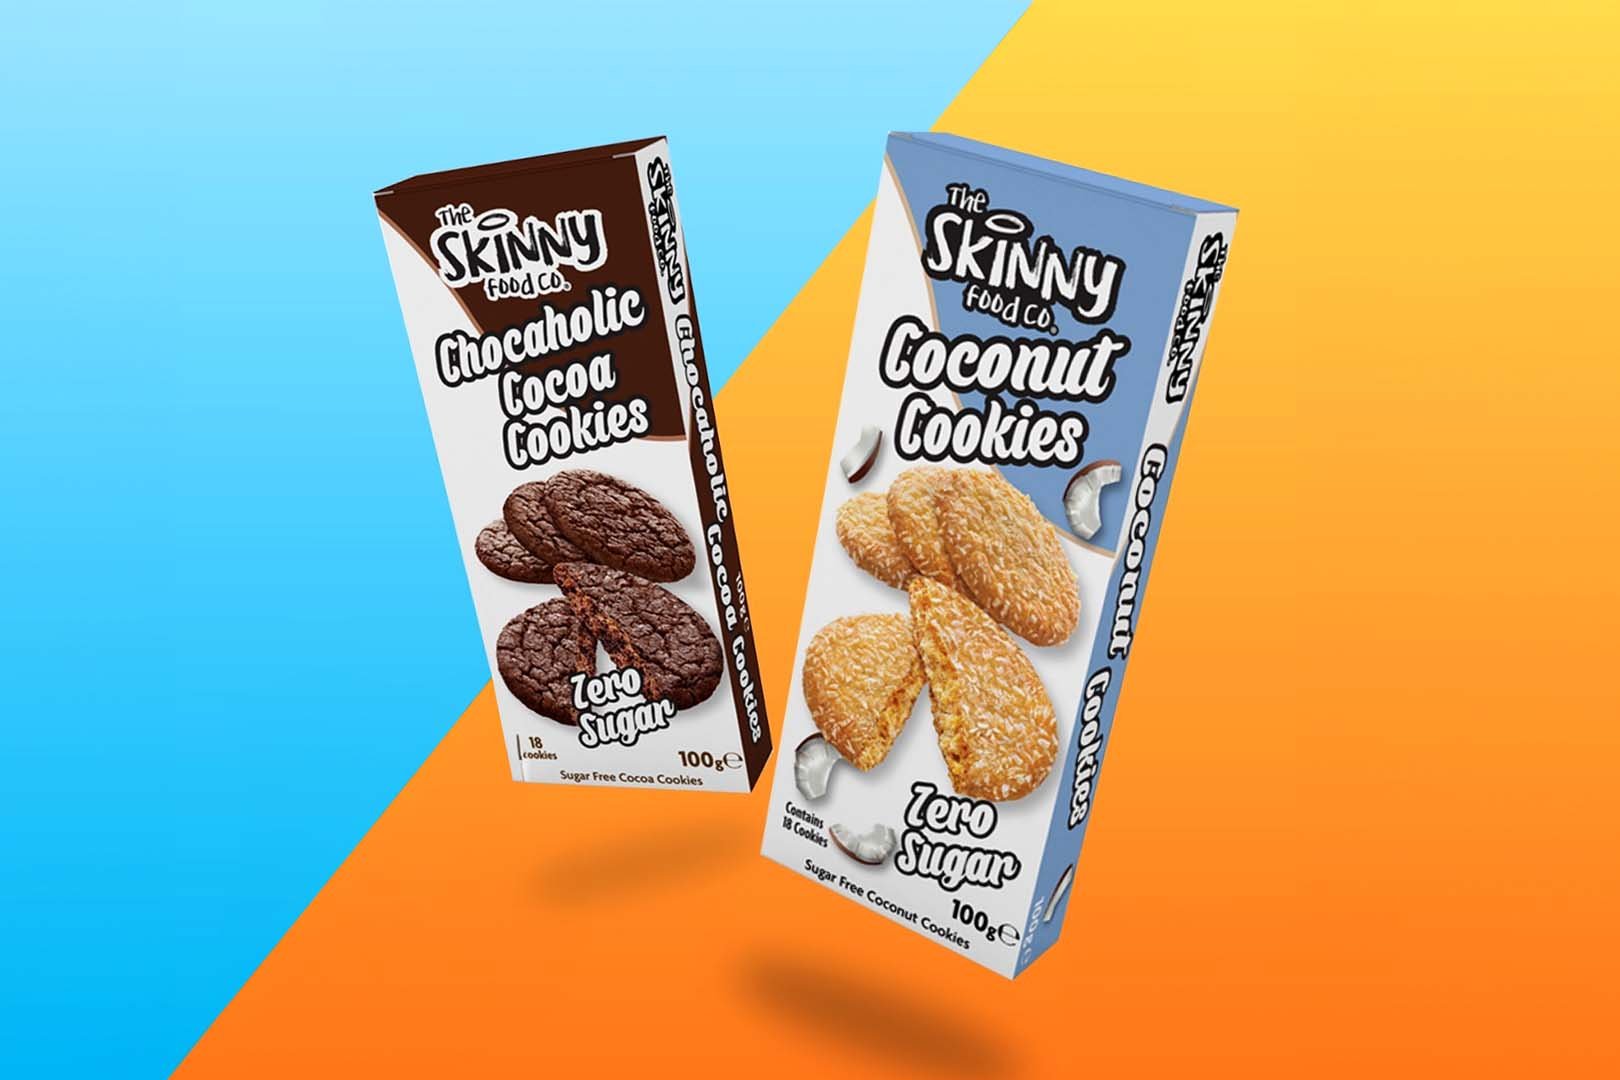 The Skinny Food Co Coconut And Cocoa Cookies